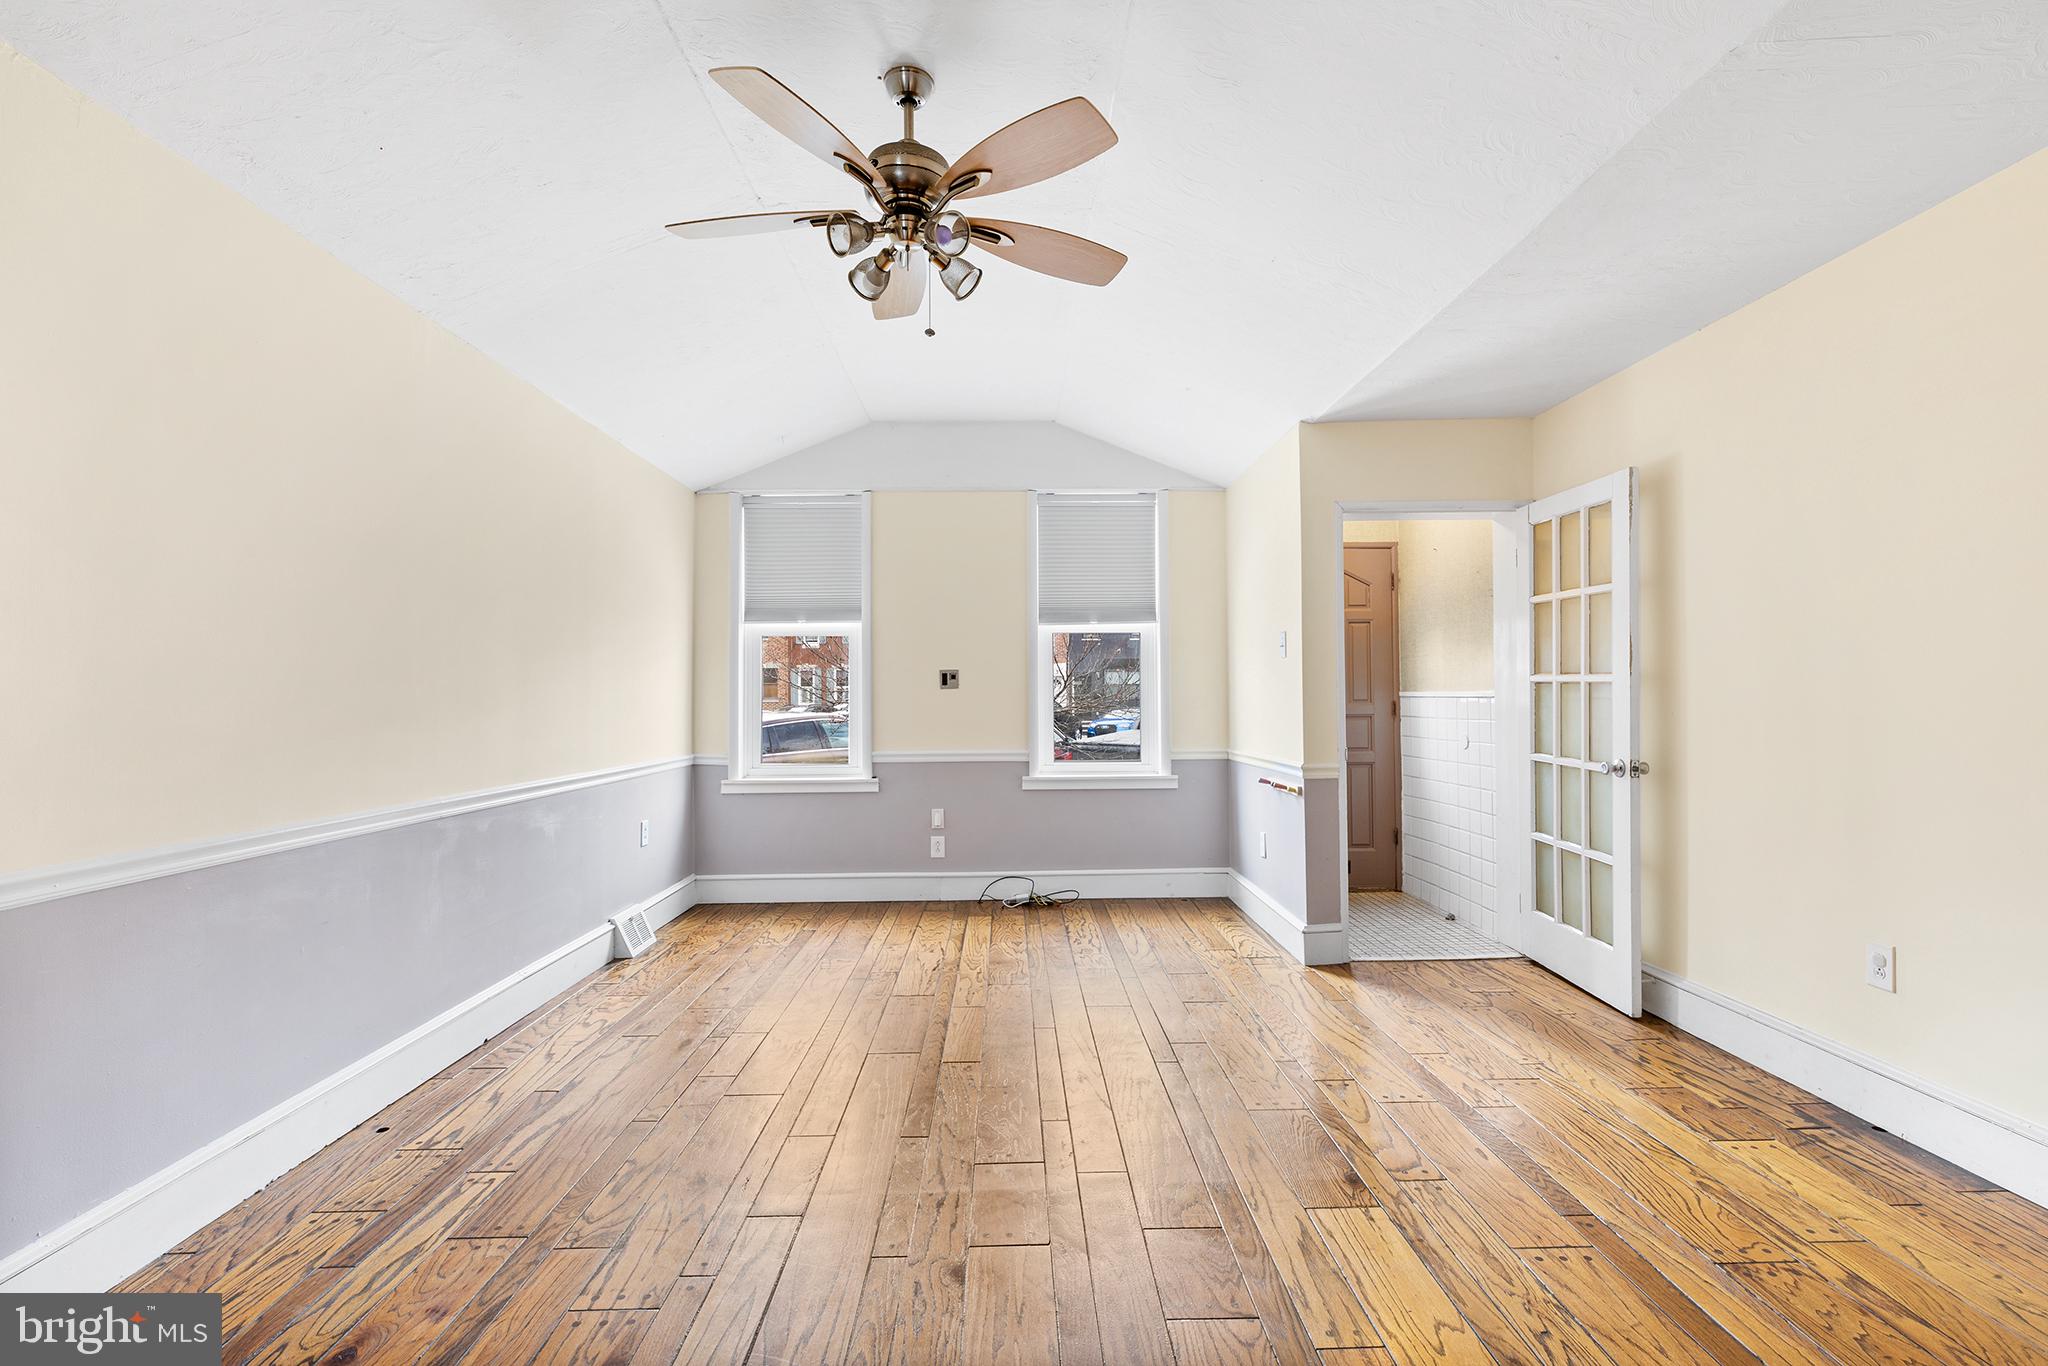 a view of a room with wooden floor and a ceiling fan